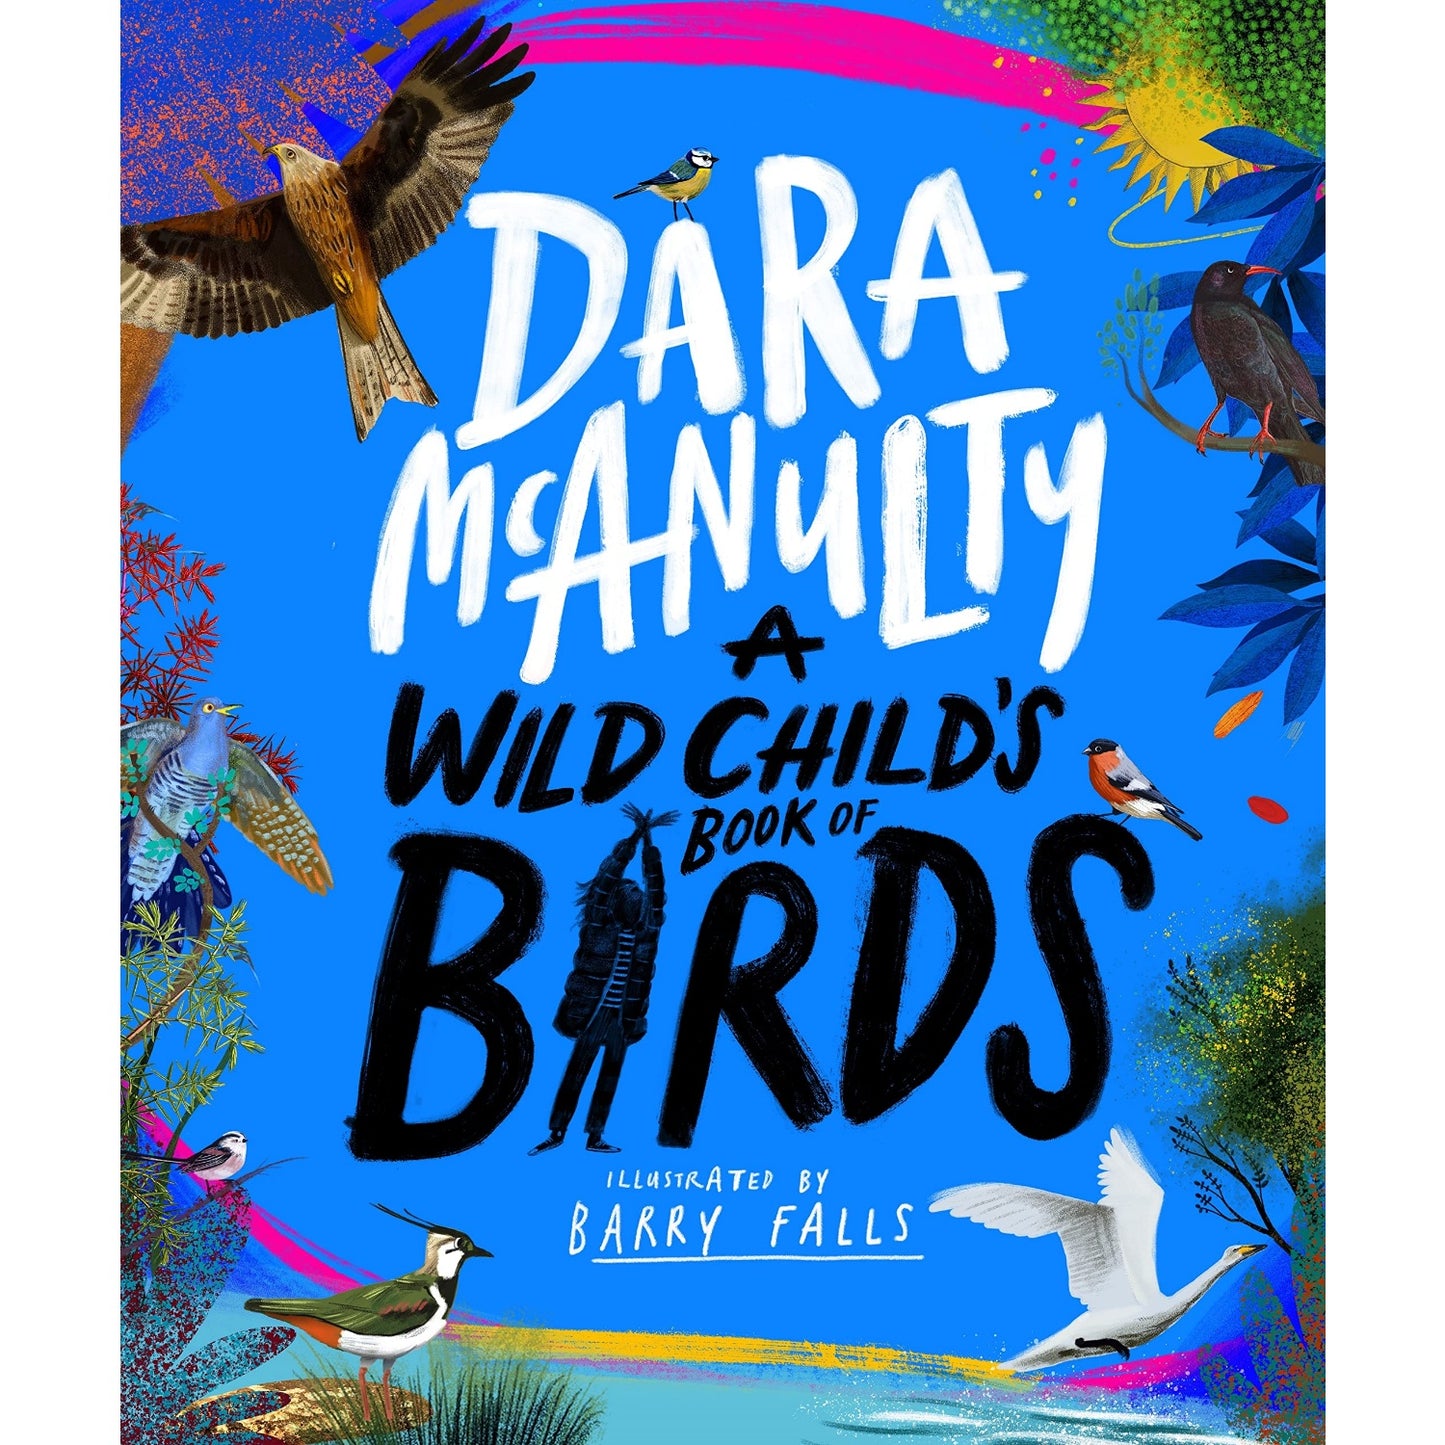 A Wild Child's Book of Birds | Hardcover | Children’s Book on Nature